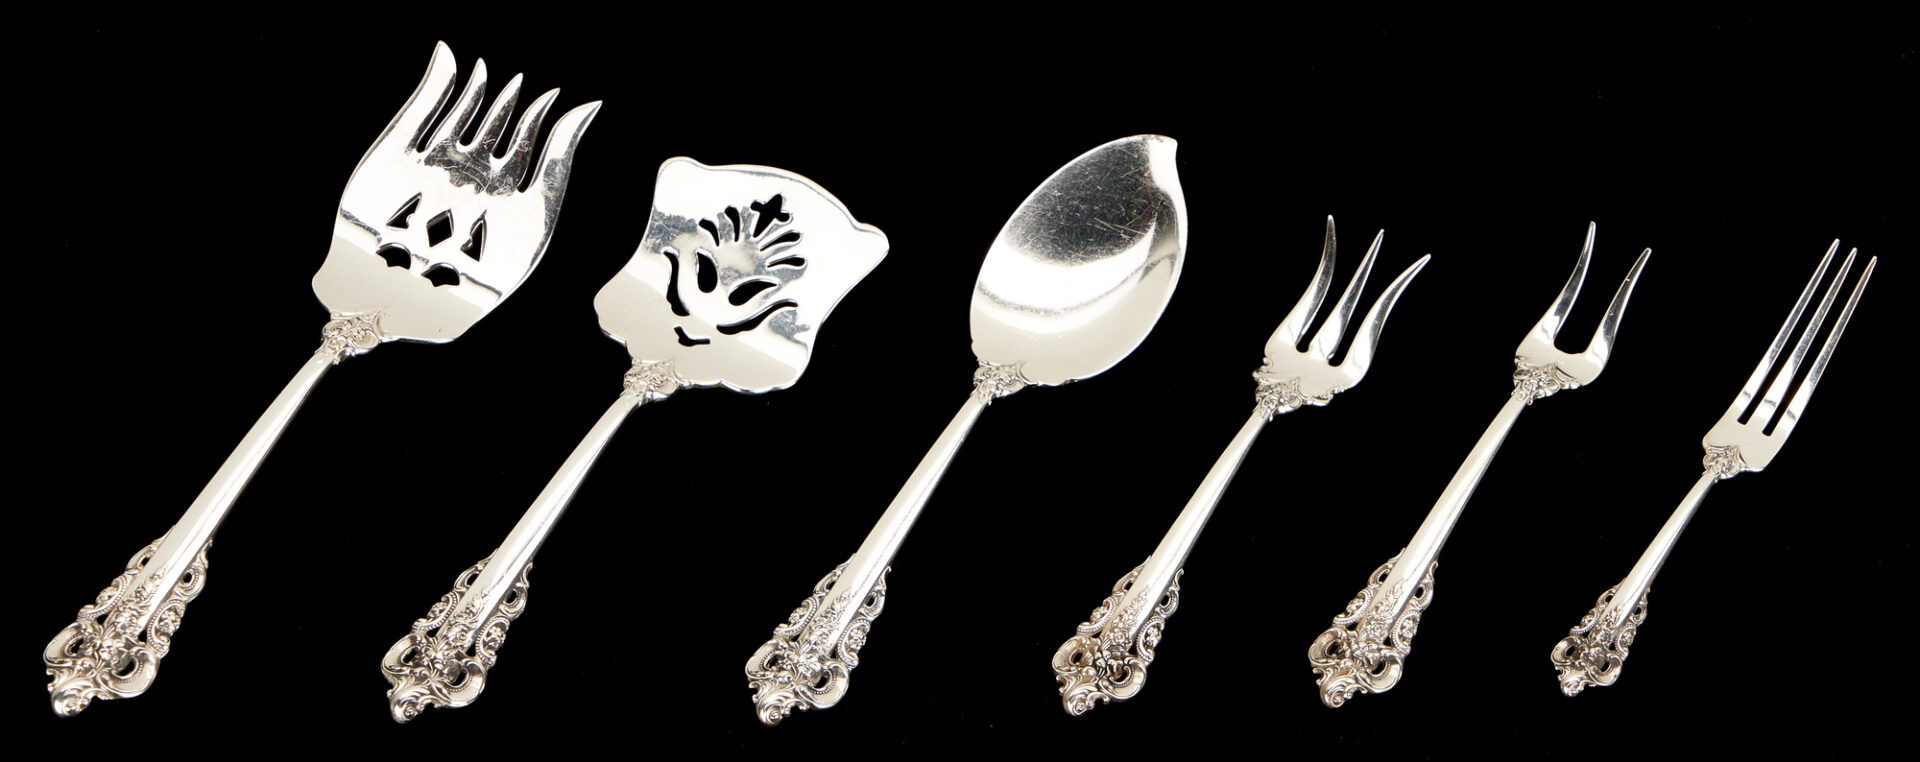 Lot 69: 239 pieces Wallace Grand Baroque Sterling Silver Flatware, Service for 12